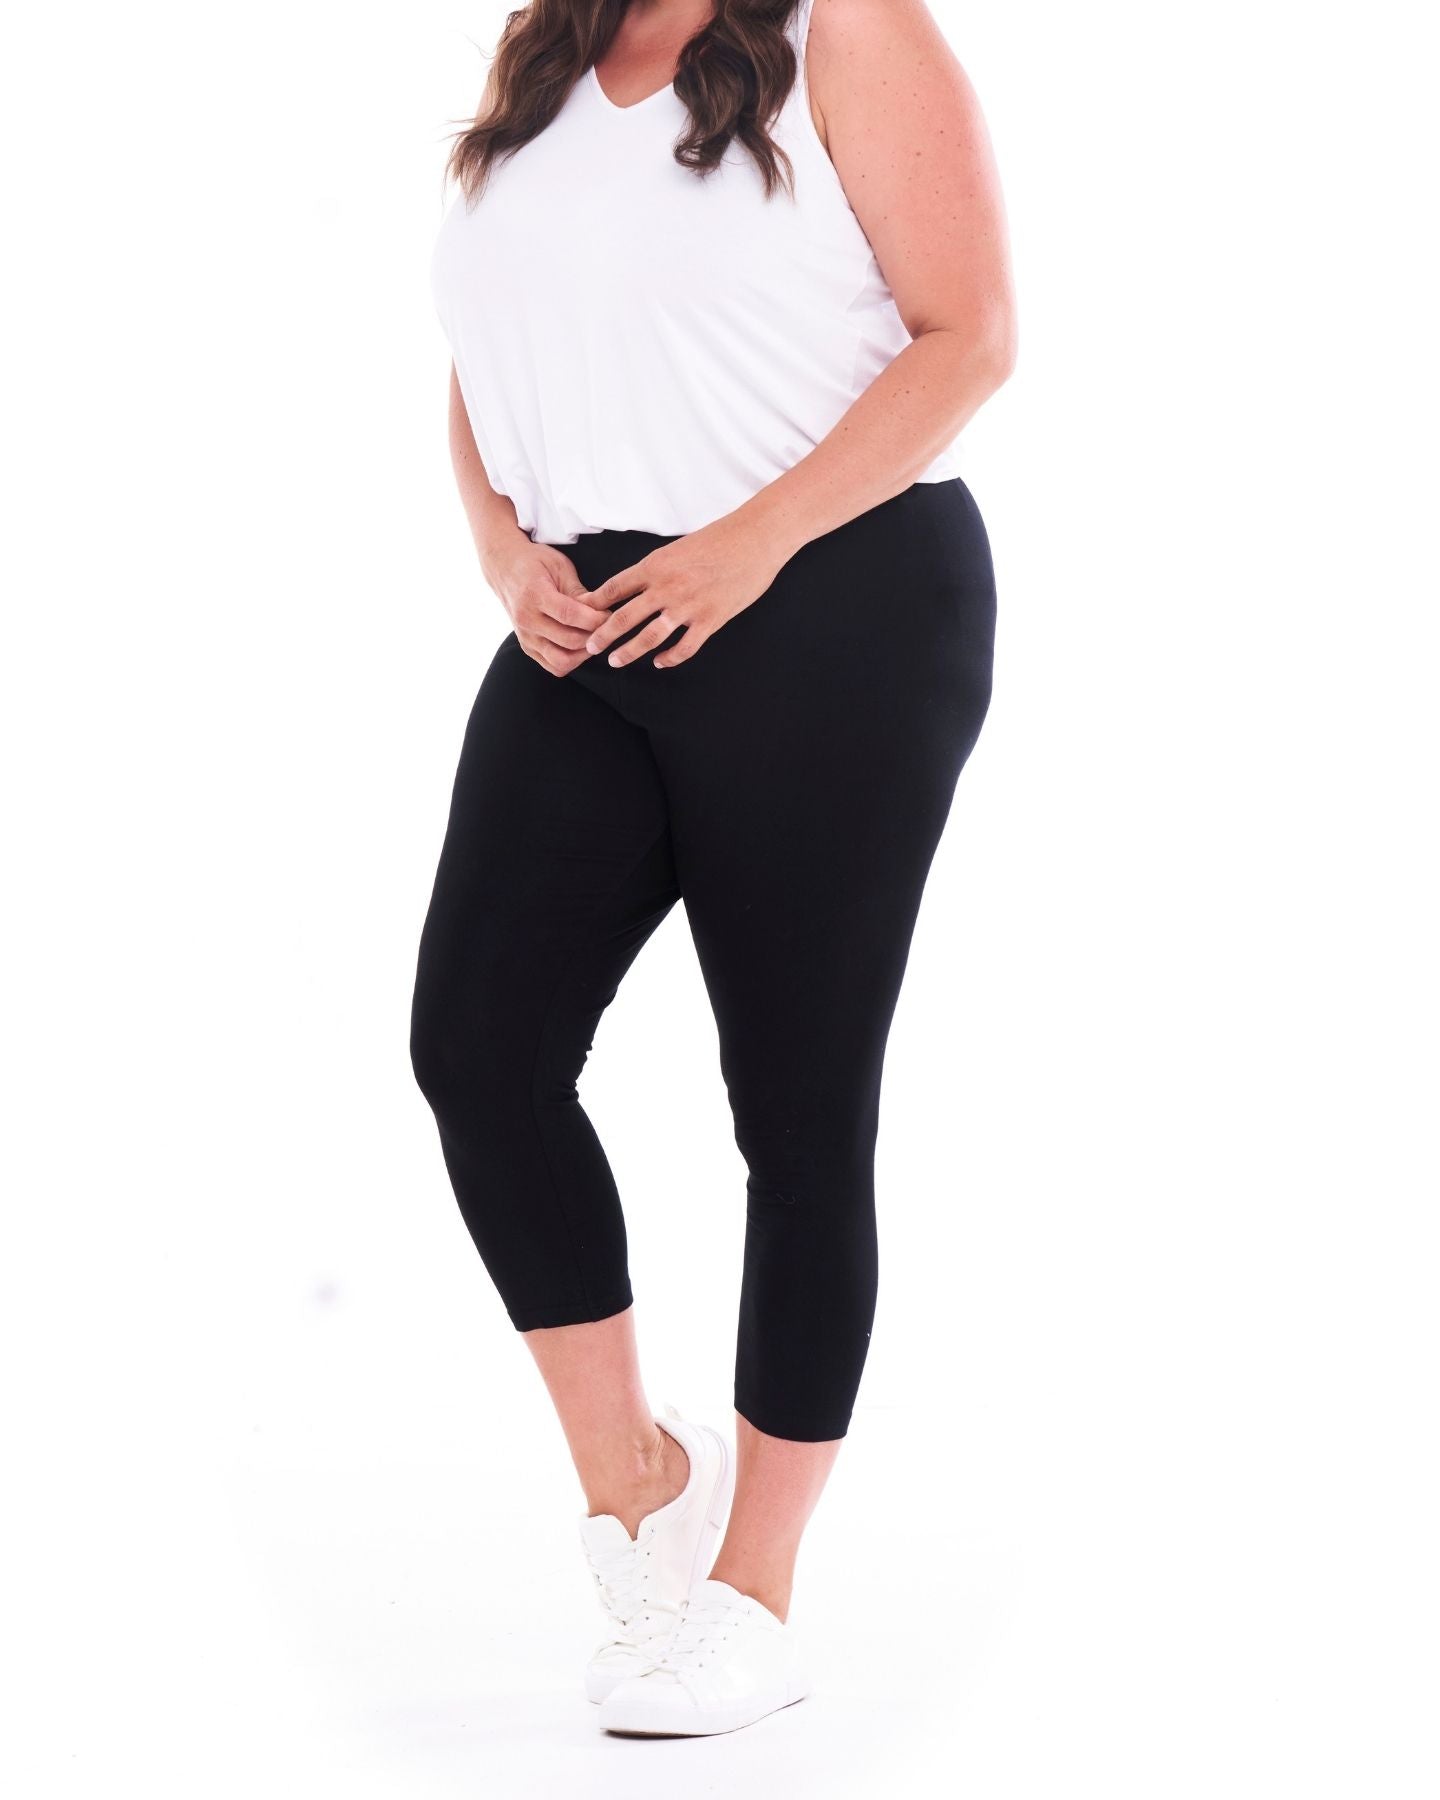 Betty Basics  Black Check Ciao Ponte Leggings – The Cottage Collection